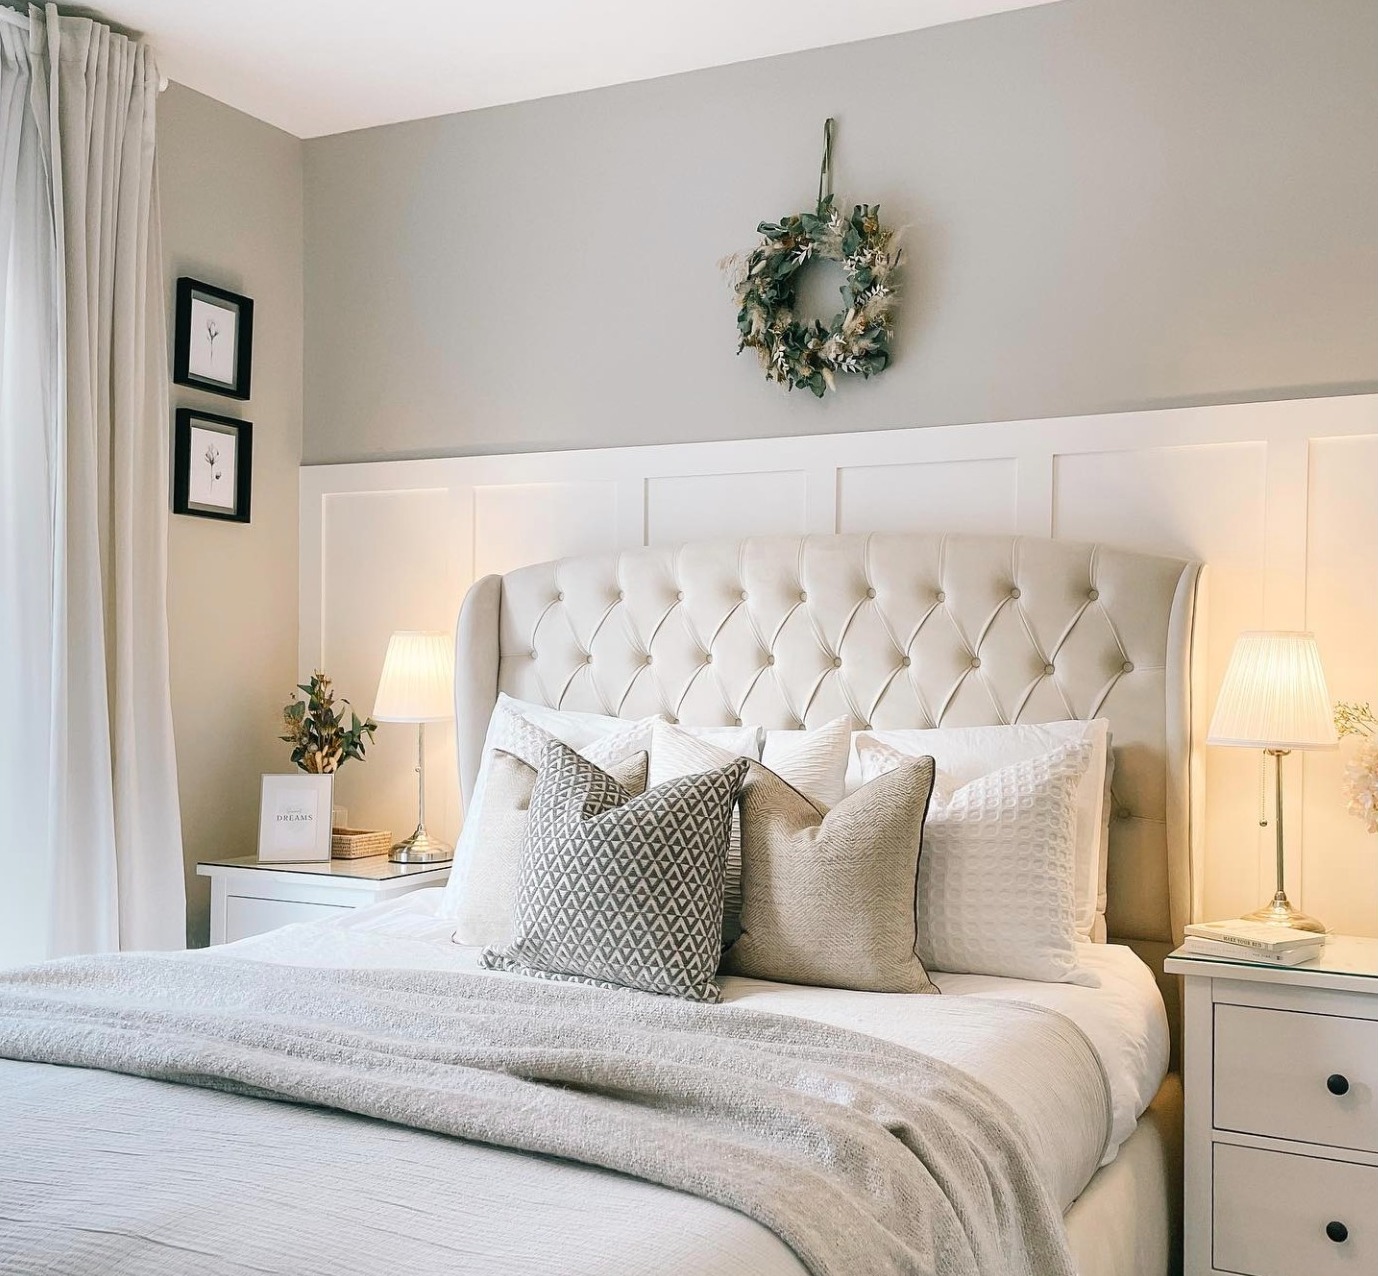 Bedroom painted in farrow and ball corn forth white, with pure white panelling. the bed has an upholstered headboard, and neutral curtains at the windows.